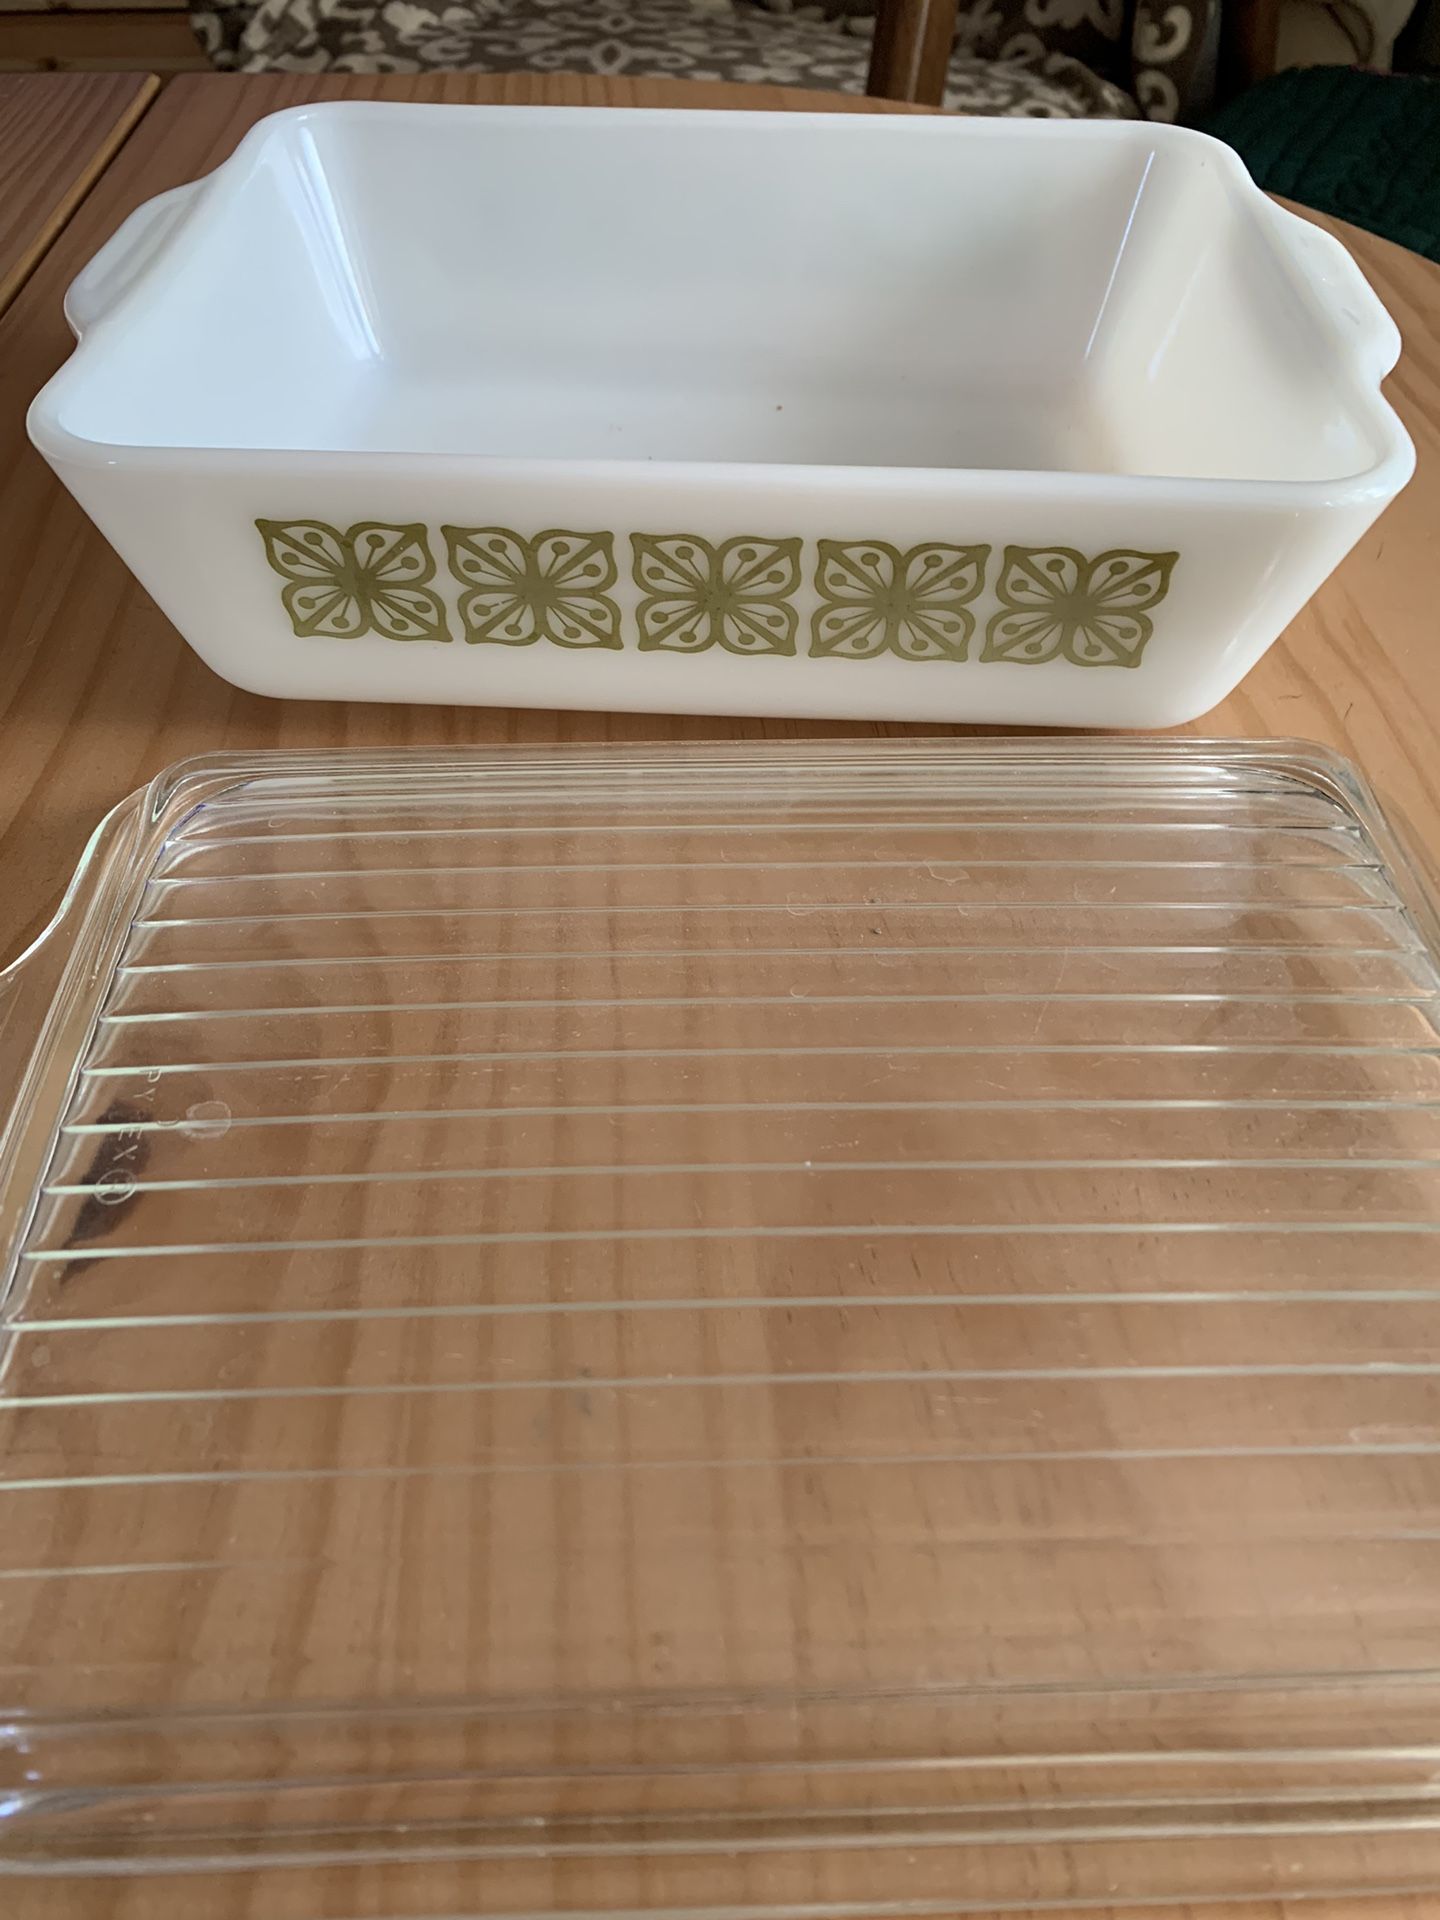 Pyrex 9x13 Baking Dish w/ Lid for Sale in San Diego, CA - OfferUp